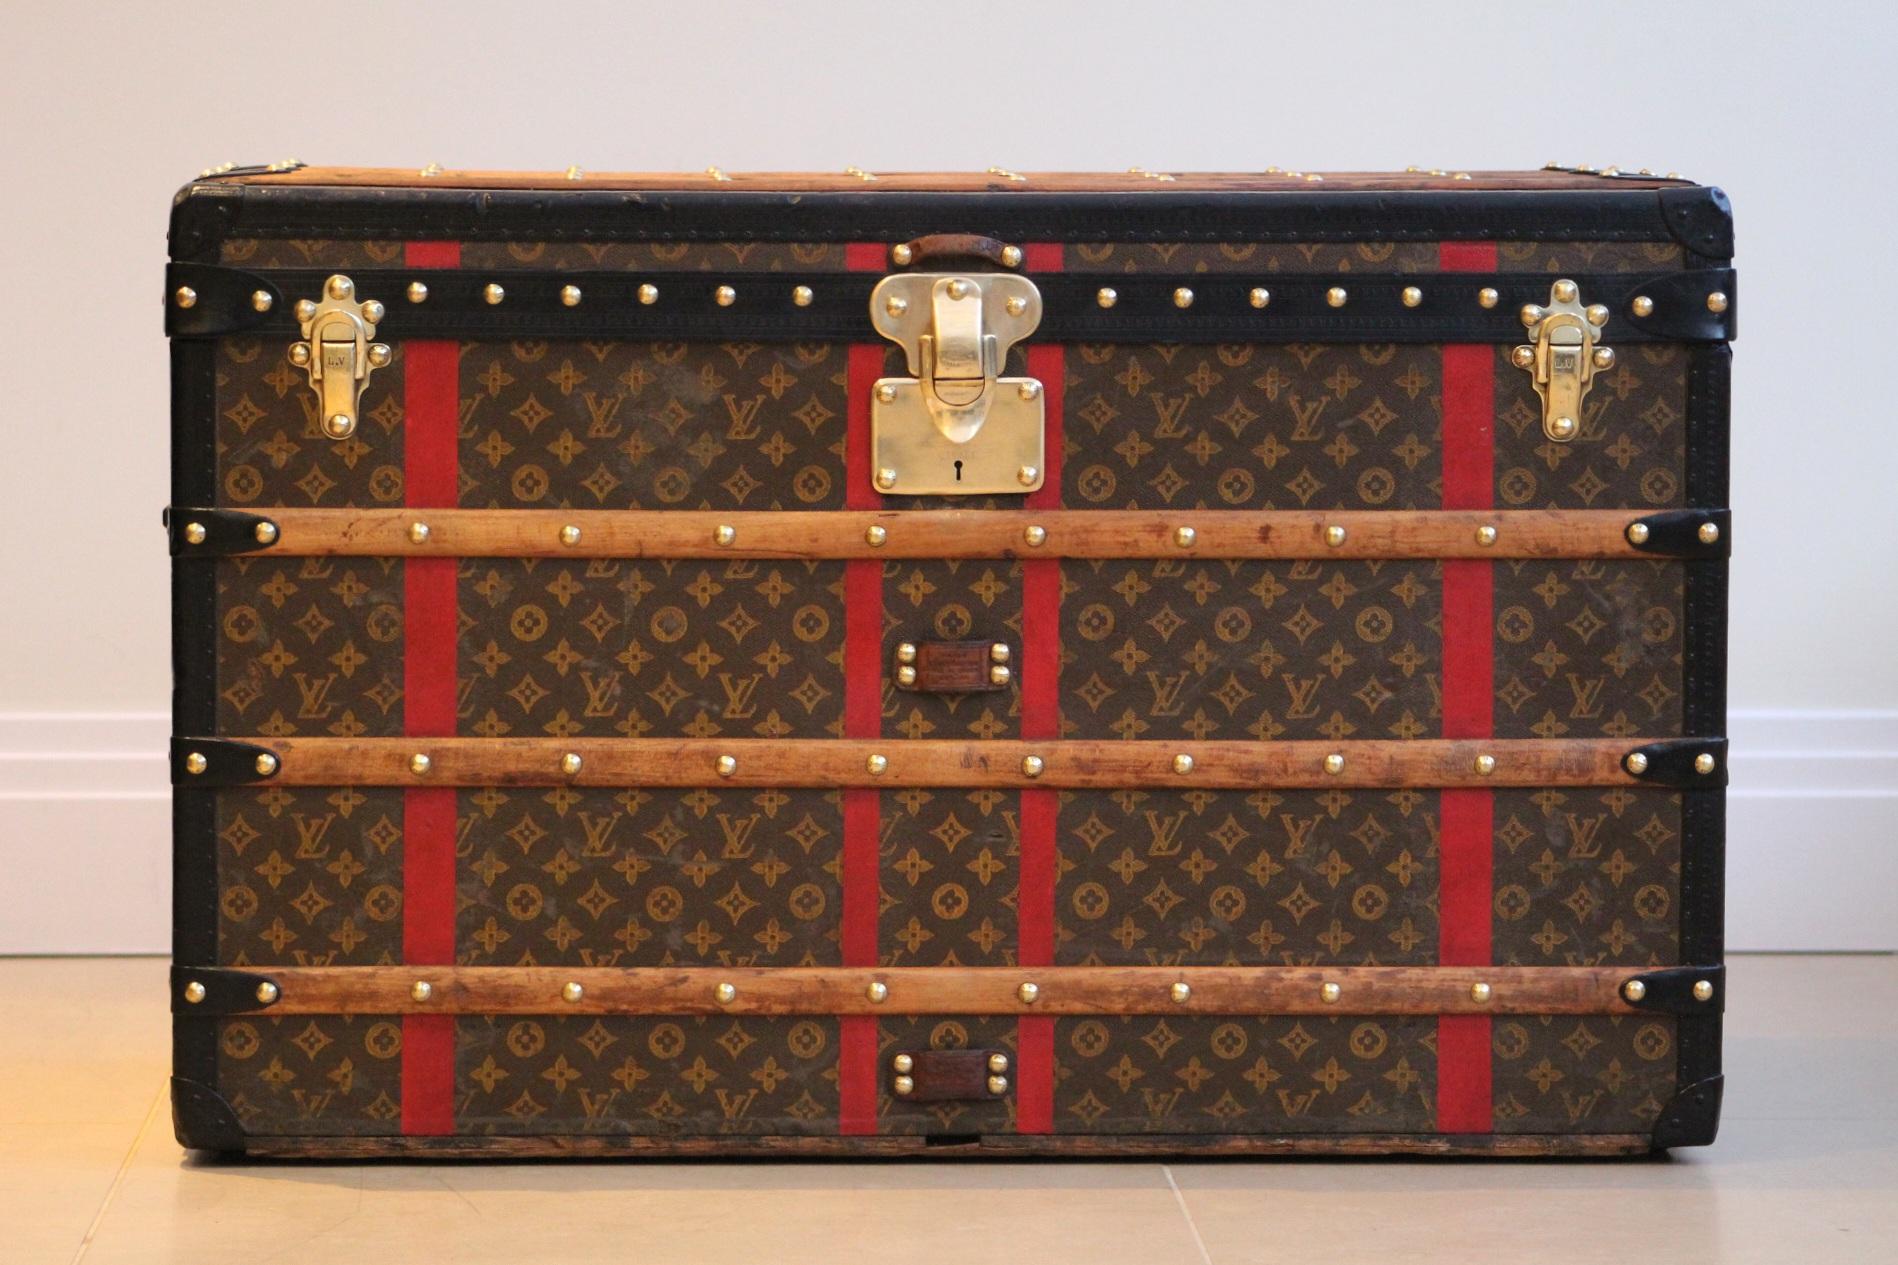 Step back in time and immerse yourself in the luxury and elegance of the early 20th century with this stunning 1910s Louis Vuitton Trunk. This exquisite piece is a testament to the timeless design and exceptional craftsmanship that has defined Louis